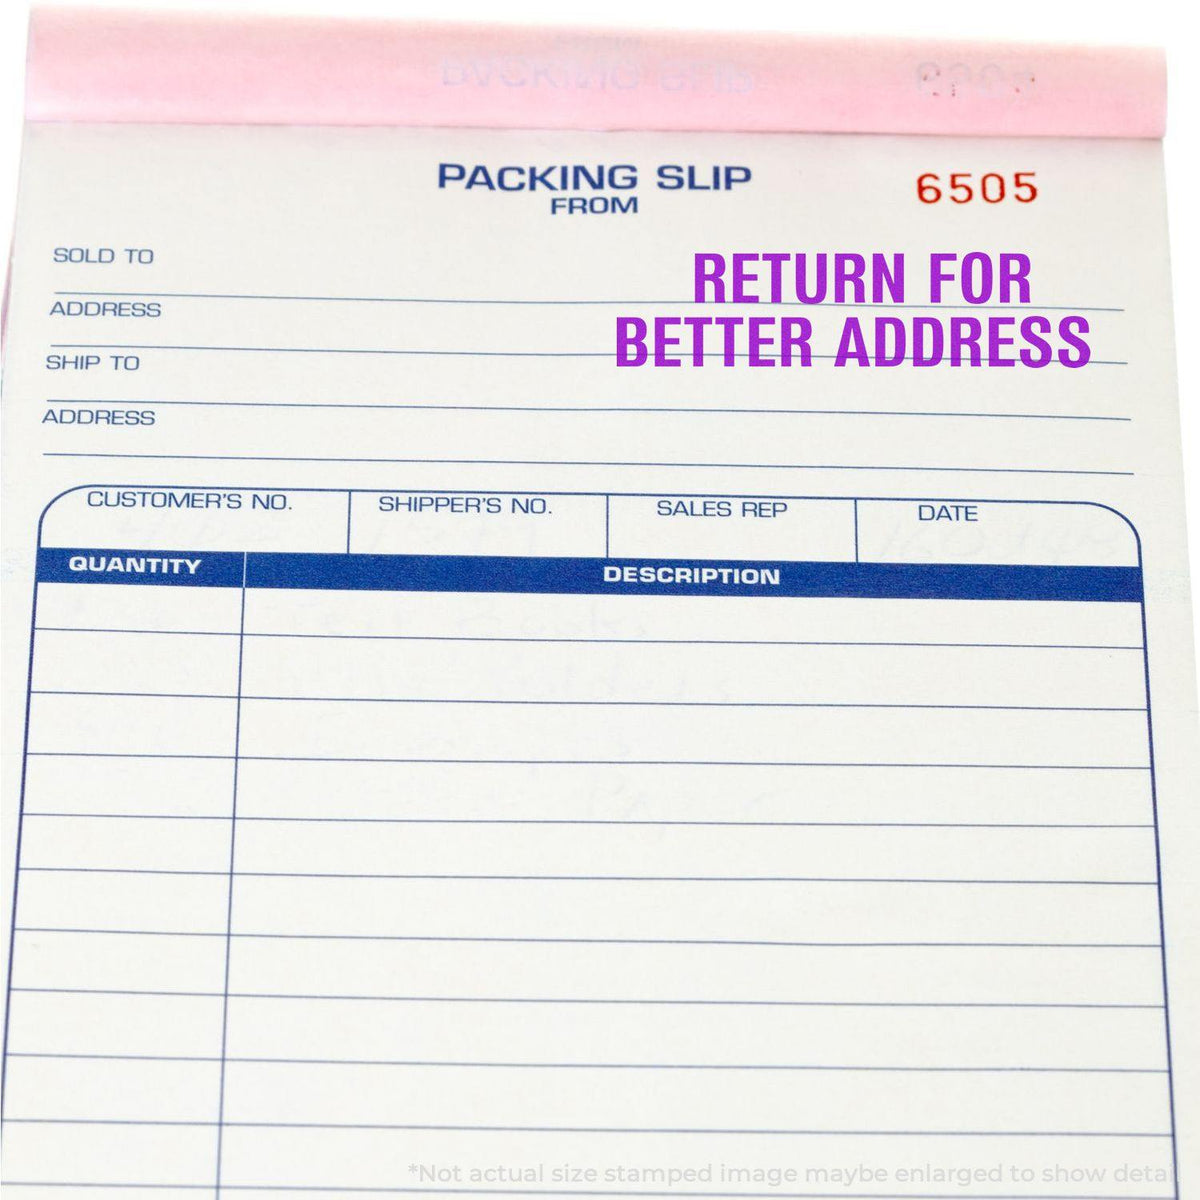 Large Return for Better Address Rubber Stamp In Use Photo